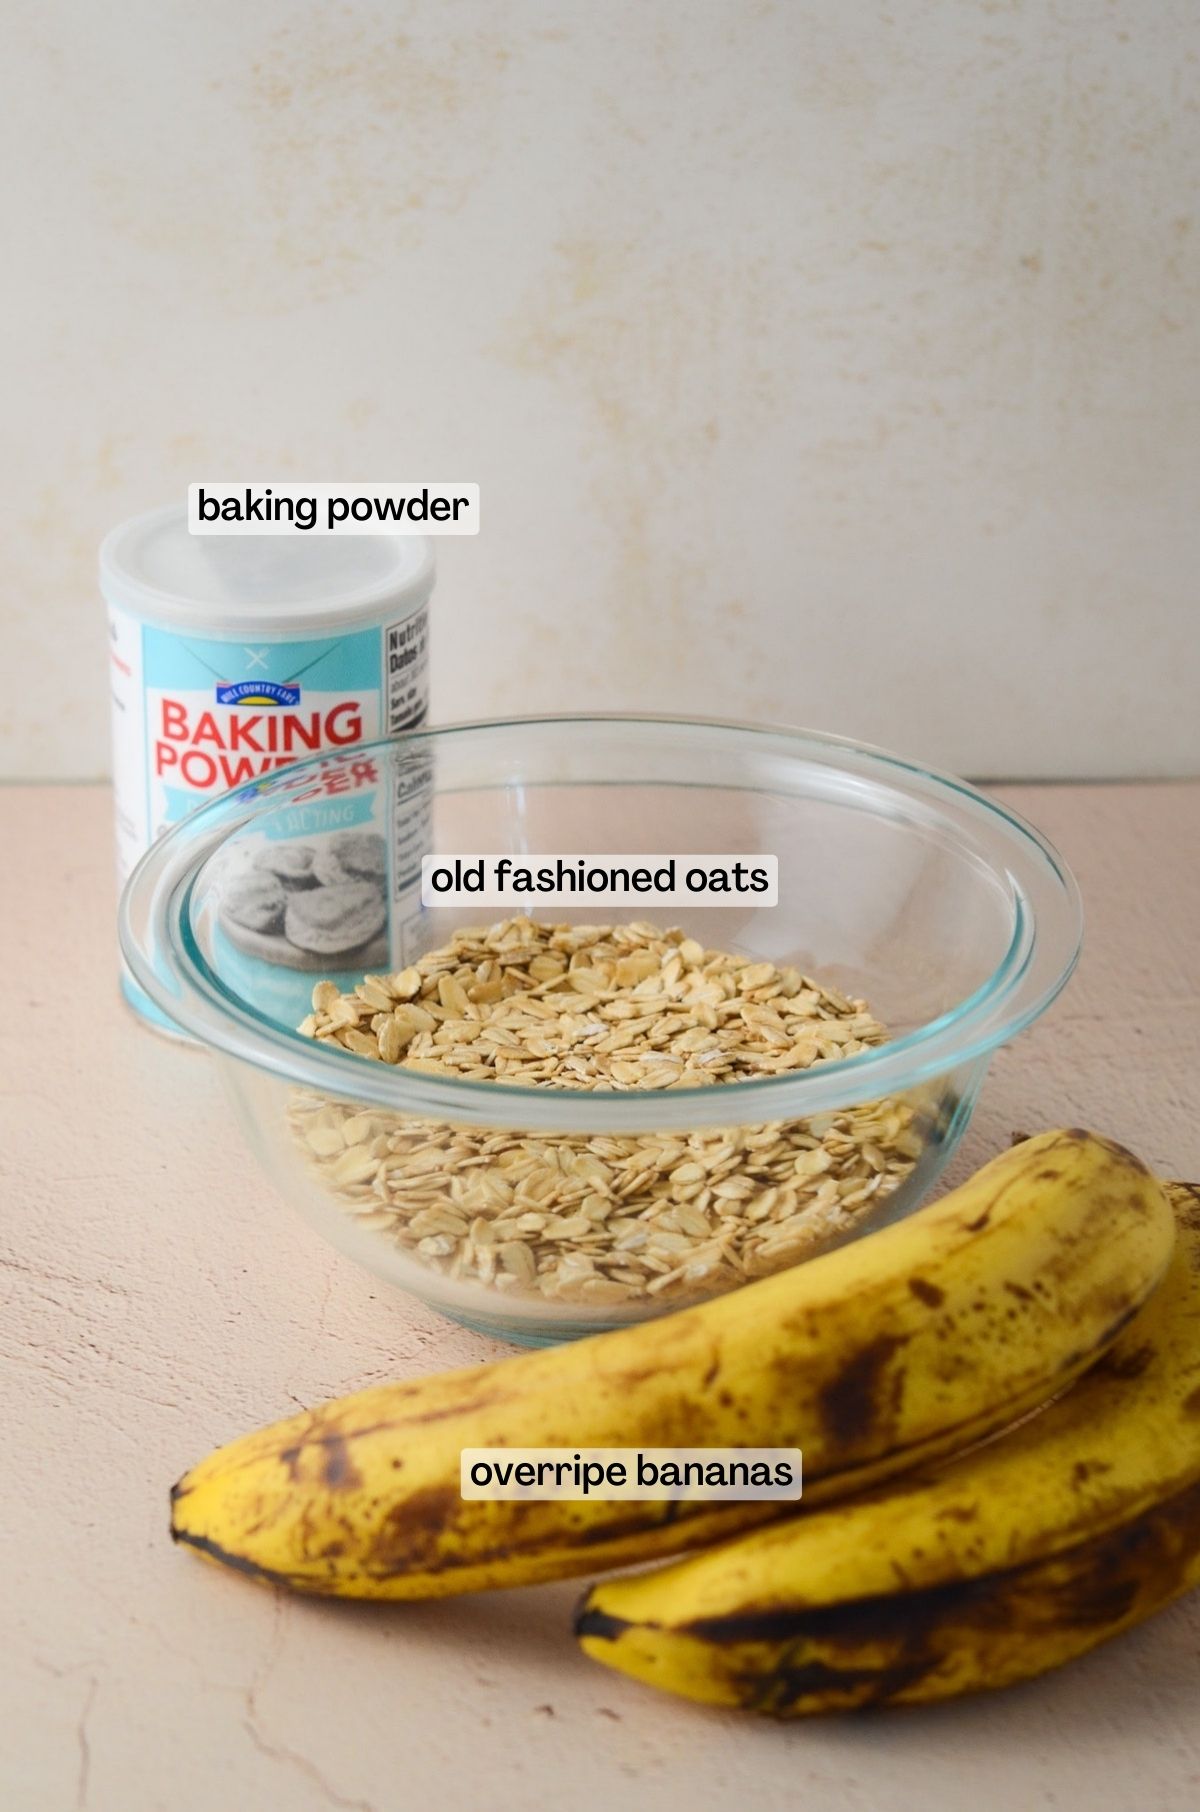 This is a photo of the ingredients including oats, baking powder, and overripe bananas.